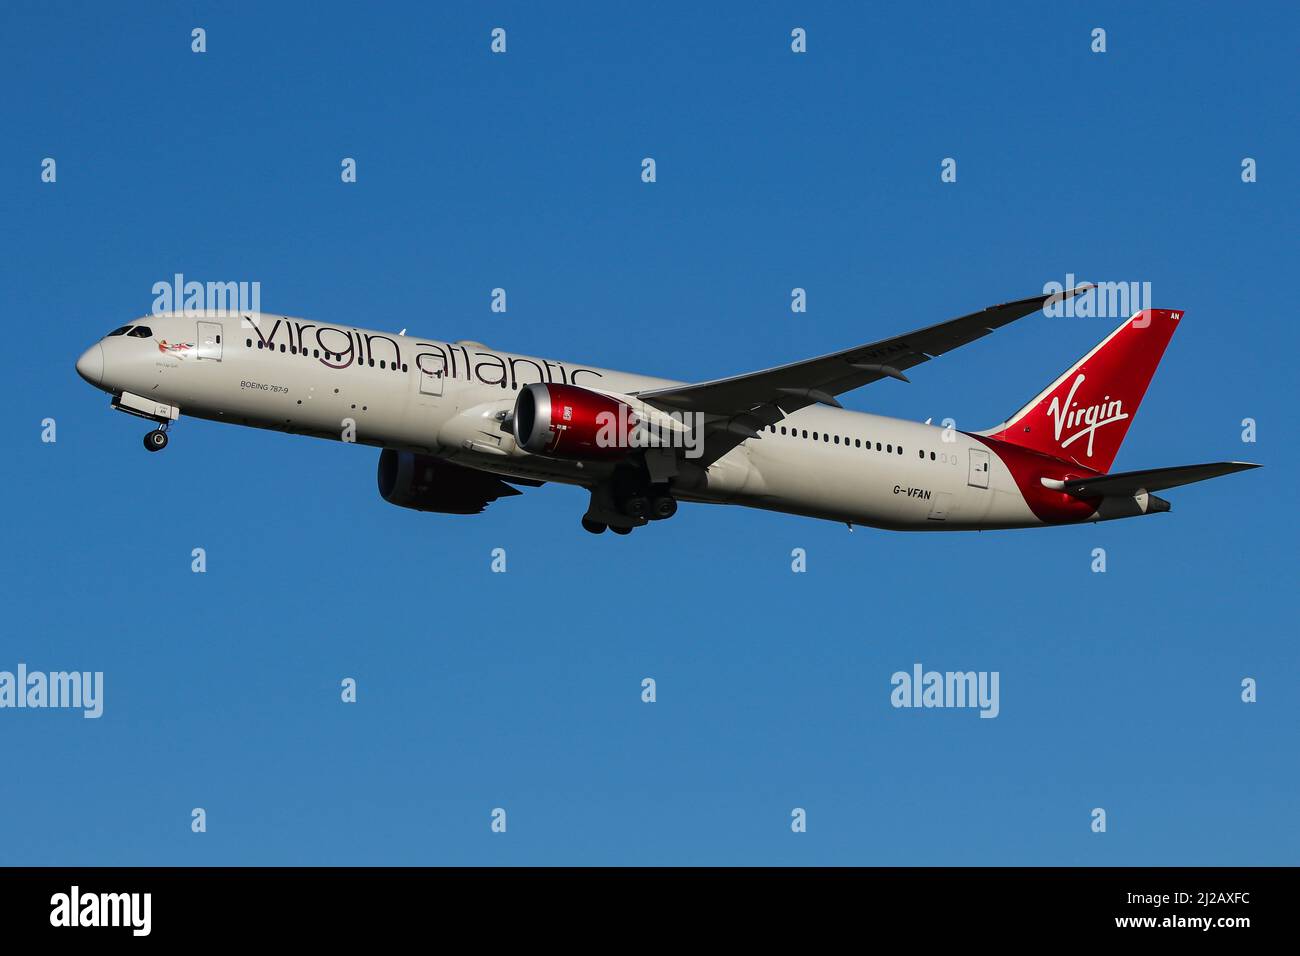 A Boeing 787 operated by Virgin Atlantic departs from London Heathrow Airport Stock Photo